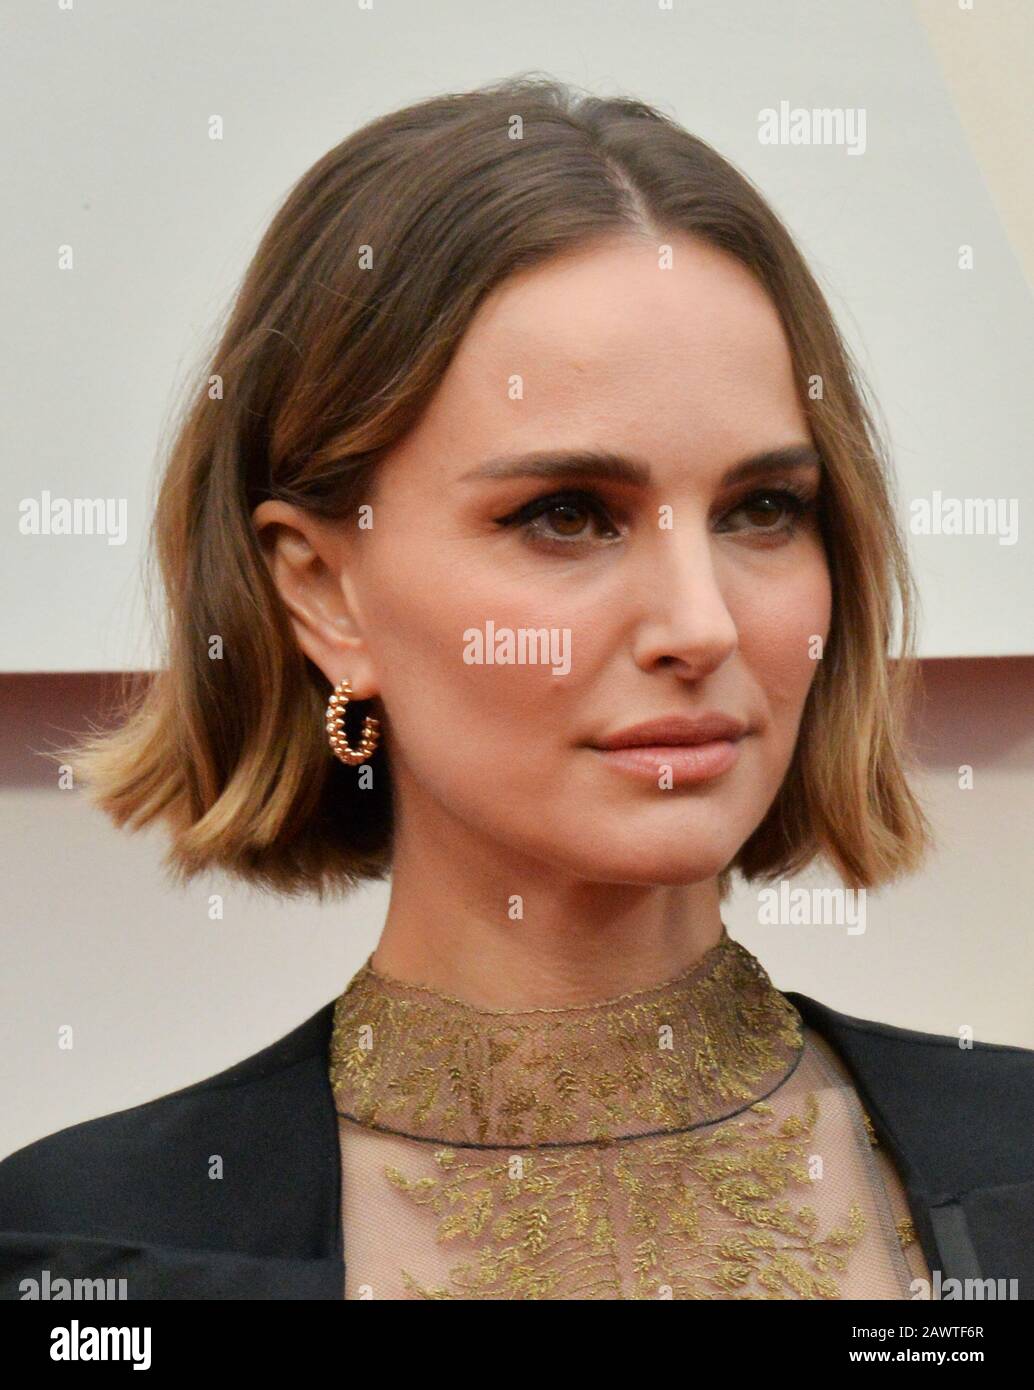 Los Angeles, United States. 09th Feb, 2020. Natalie Portman arrives for the 92nd annual Academy Awards at the Dolby Theatre in the Hollywood section of Los Angeles on Sunday, February 9, 2020. Photo by Jim Ruymen/UPI Credit: UPI/Alamy Live News Stock Photo